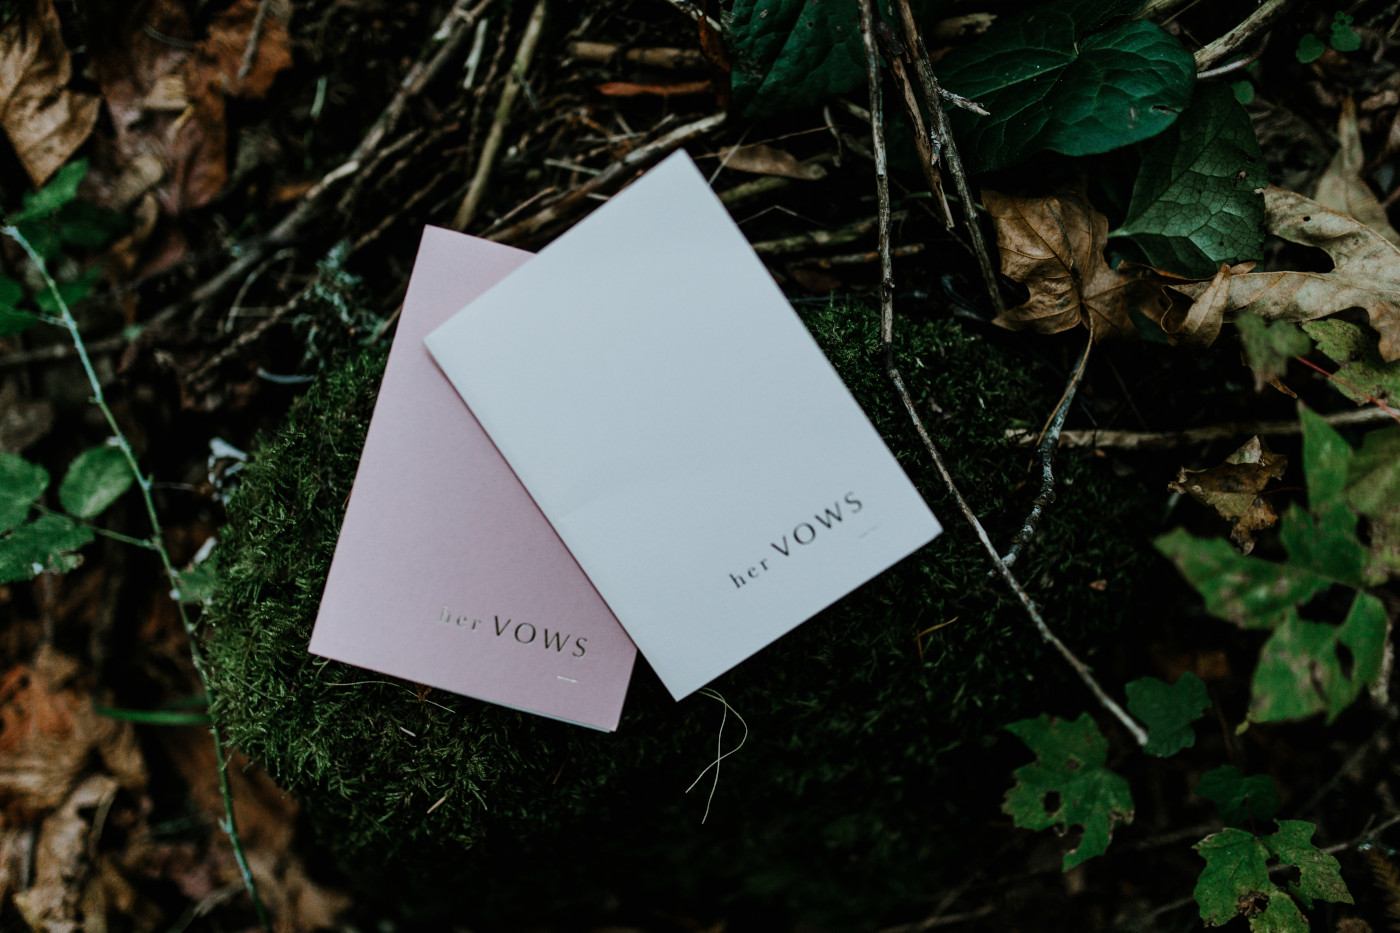 Hayley and Tiffany's vow books. Elopement photography at the Columbia River Gorge by Sienna Plus Josh.